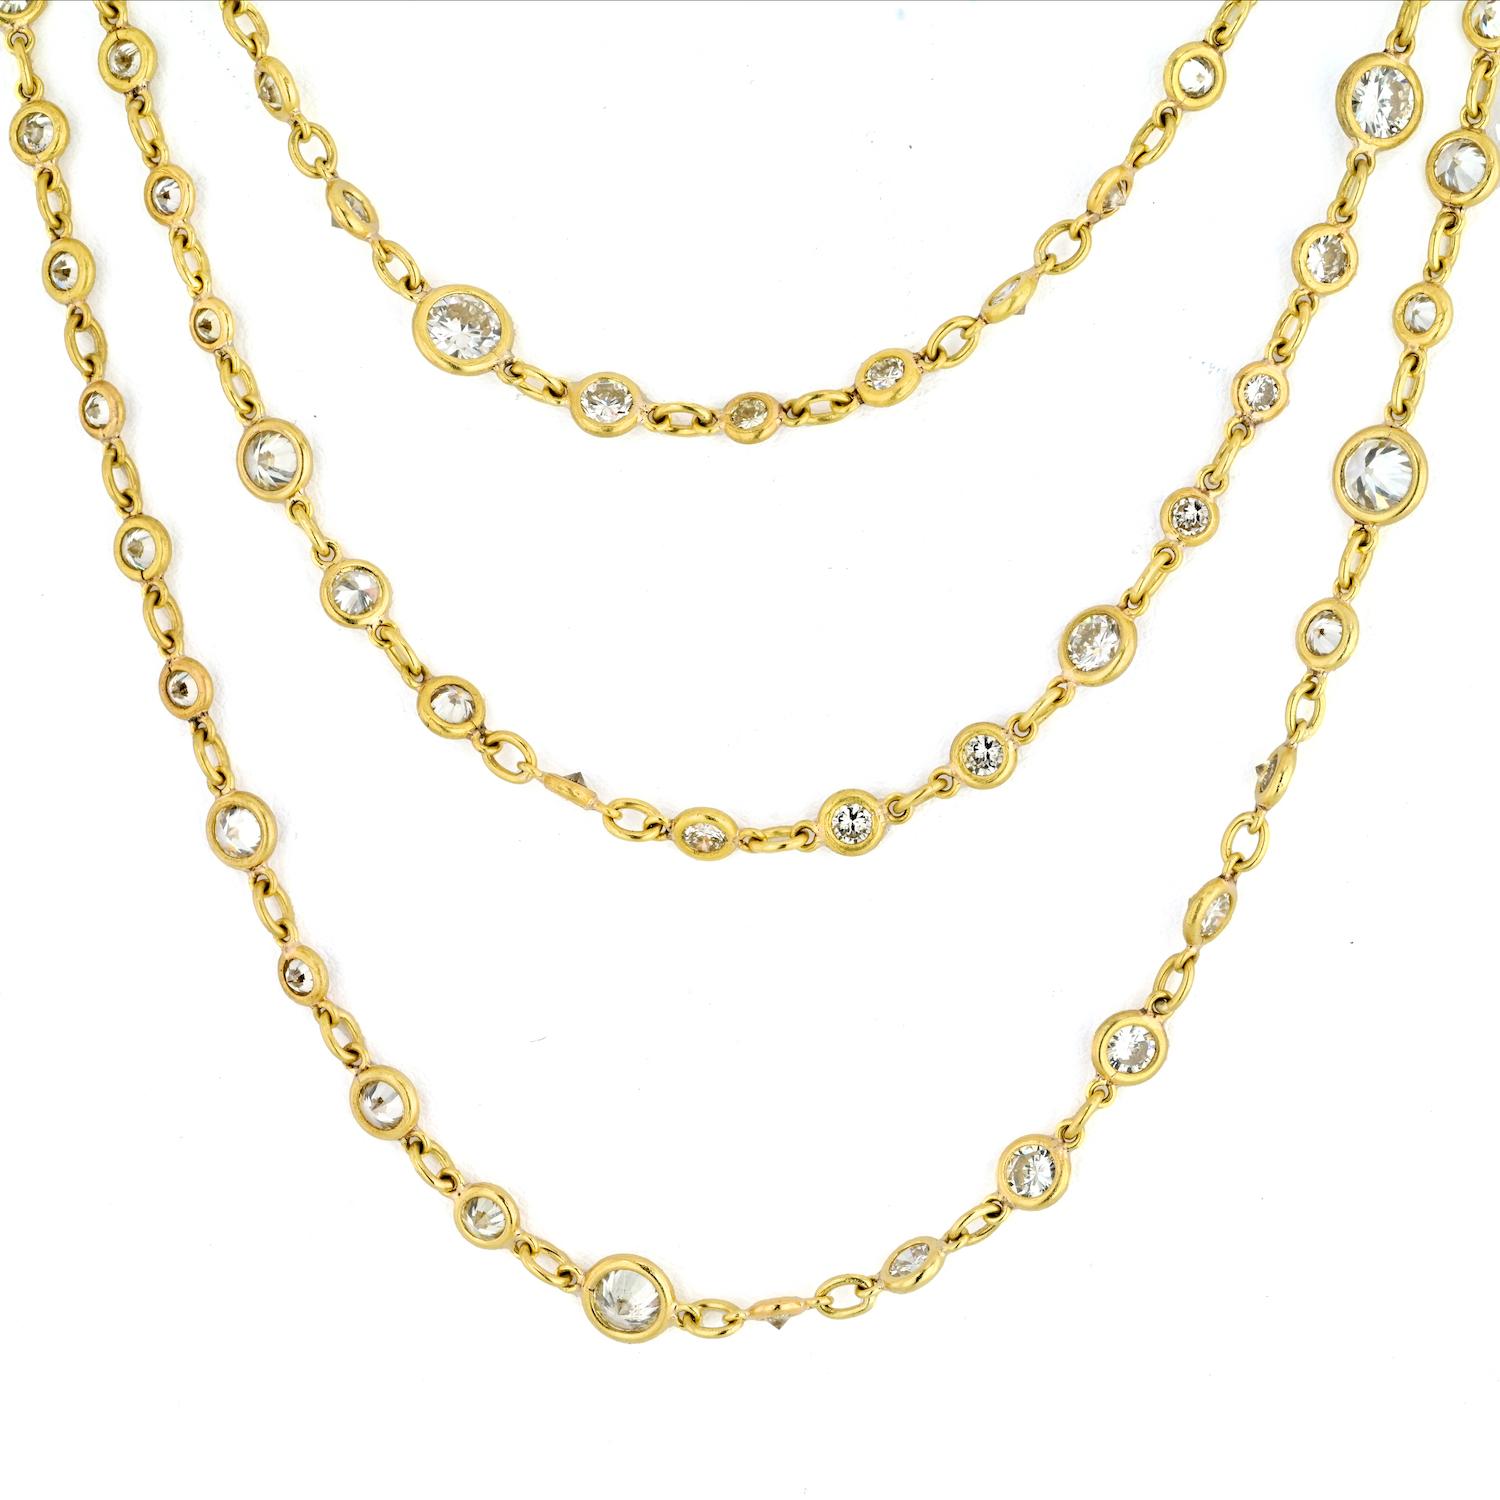 Modern 18K Yellow Gold 60 inches 30.00cttw Round Cut Diamond By The Yard Necklace For Sale